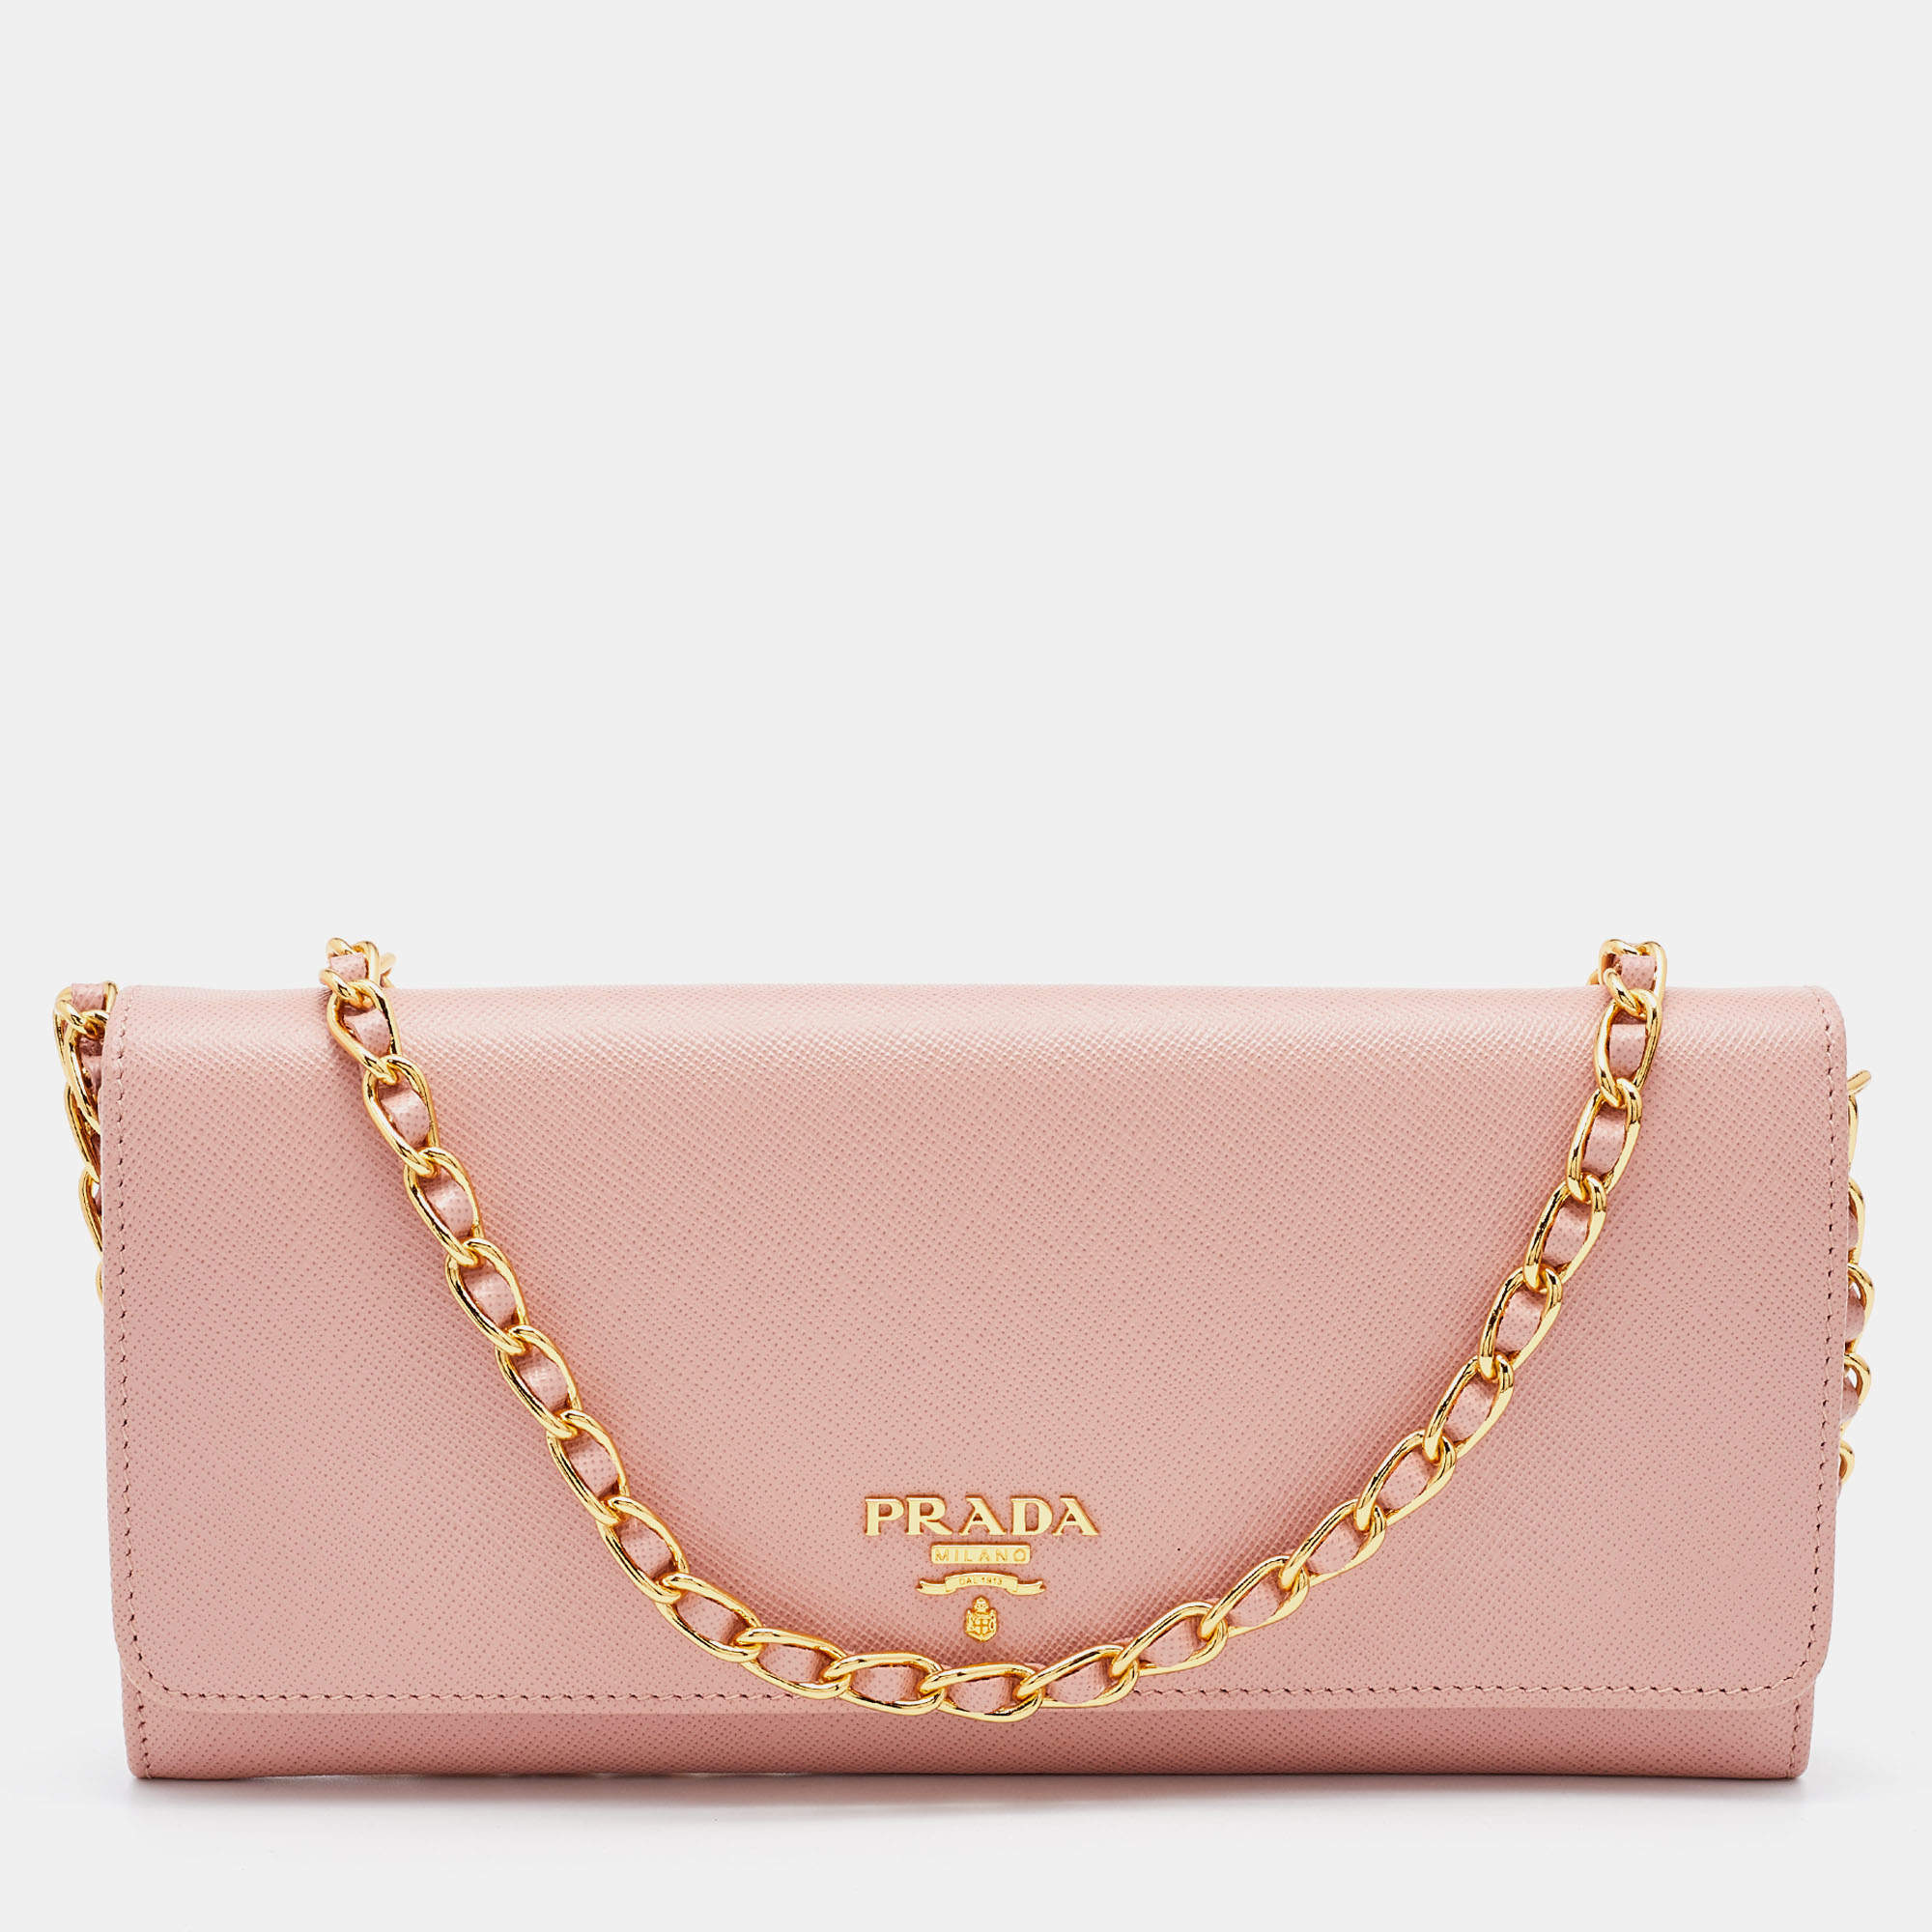 Prada Pink Saffiano Leather Wallet on Chain